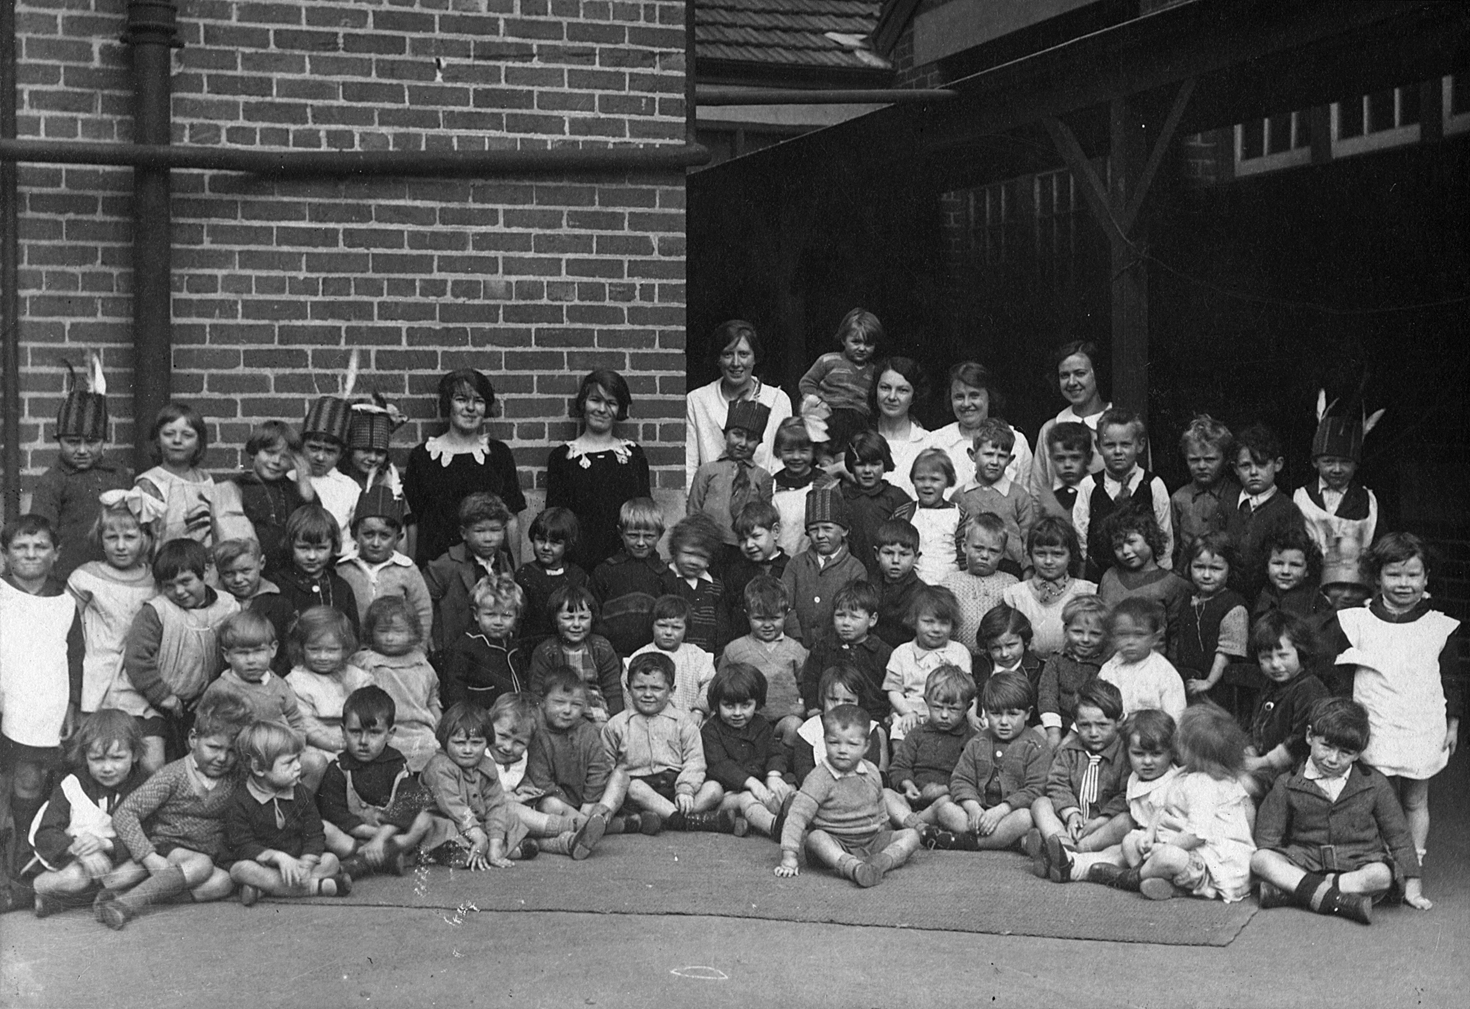 “Group photograph of children with their teachers”, Woman’s Christian Temperance Union, no date, 2001.0085.00040.      